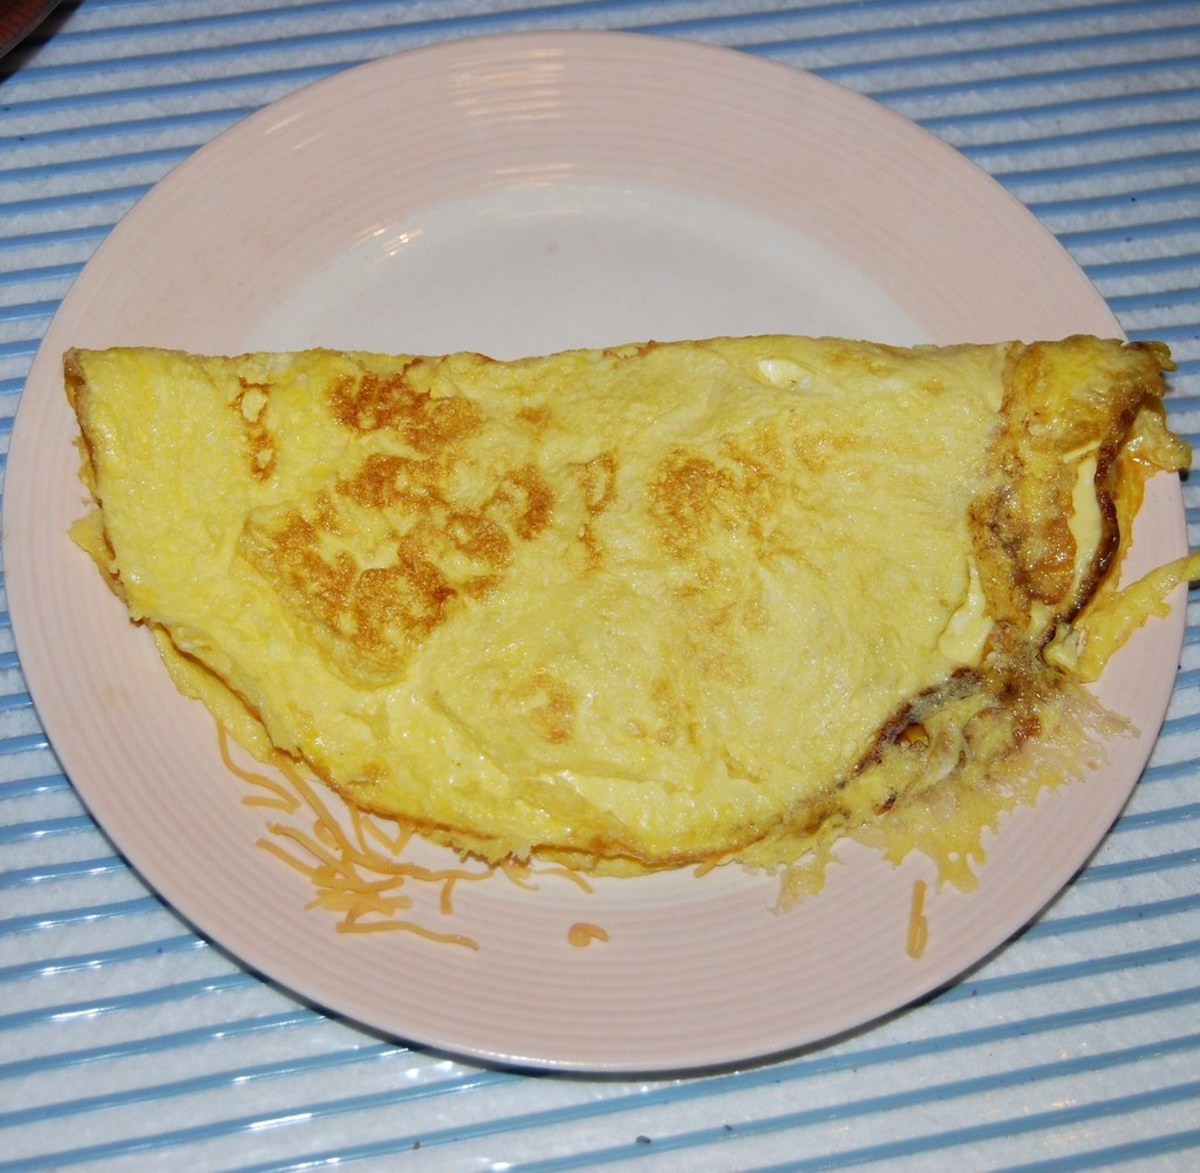 Microwave omelet